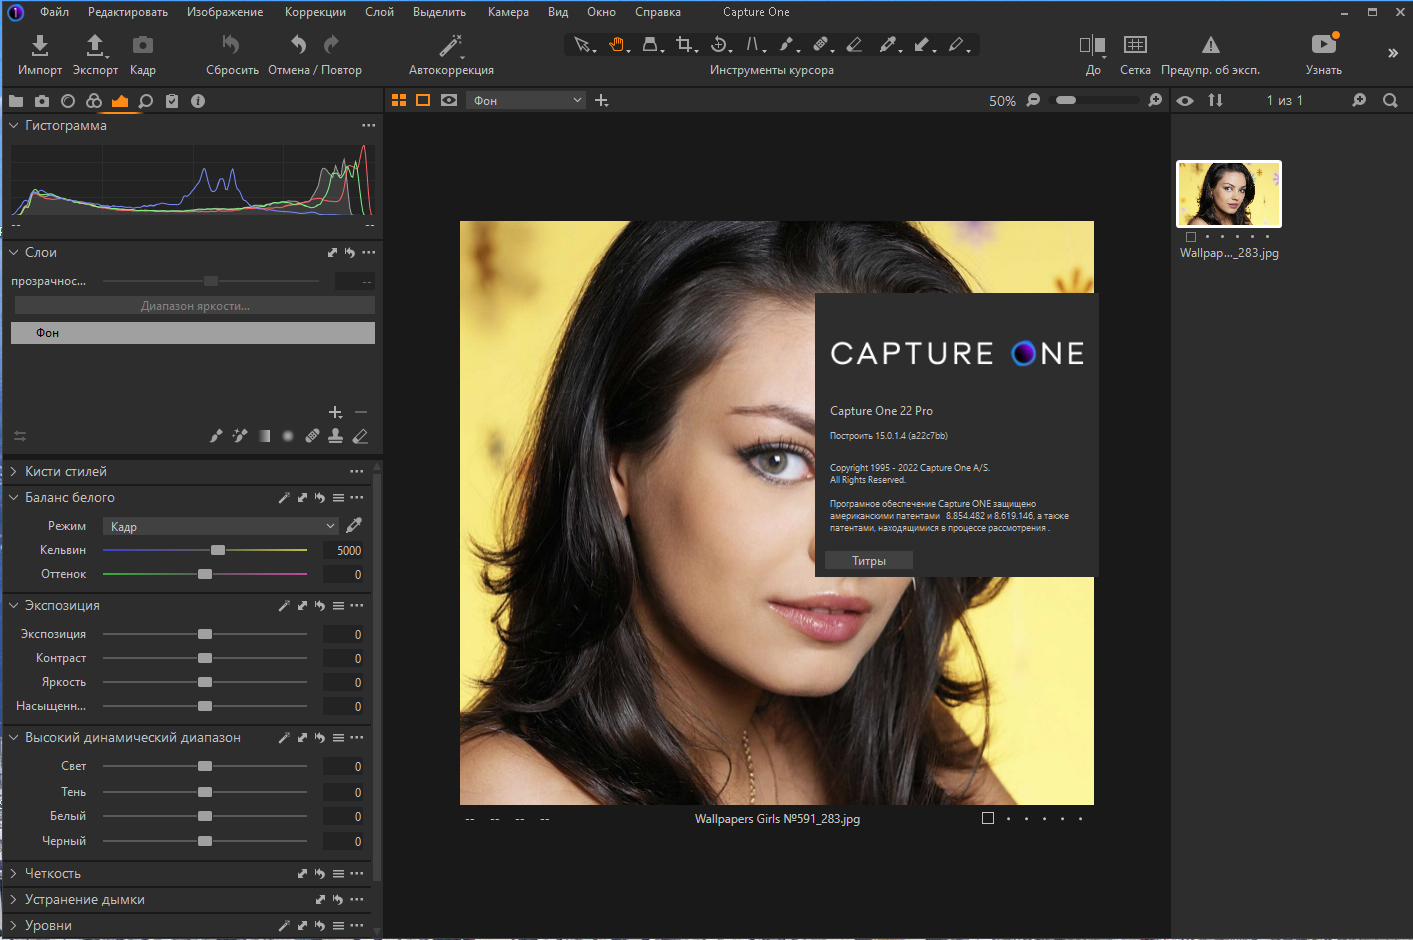 Phase One Capture One Pro 22 15.0.1.4 RePack by KpoJIuK [Multi/Ru]